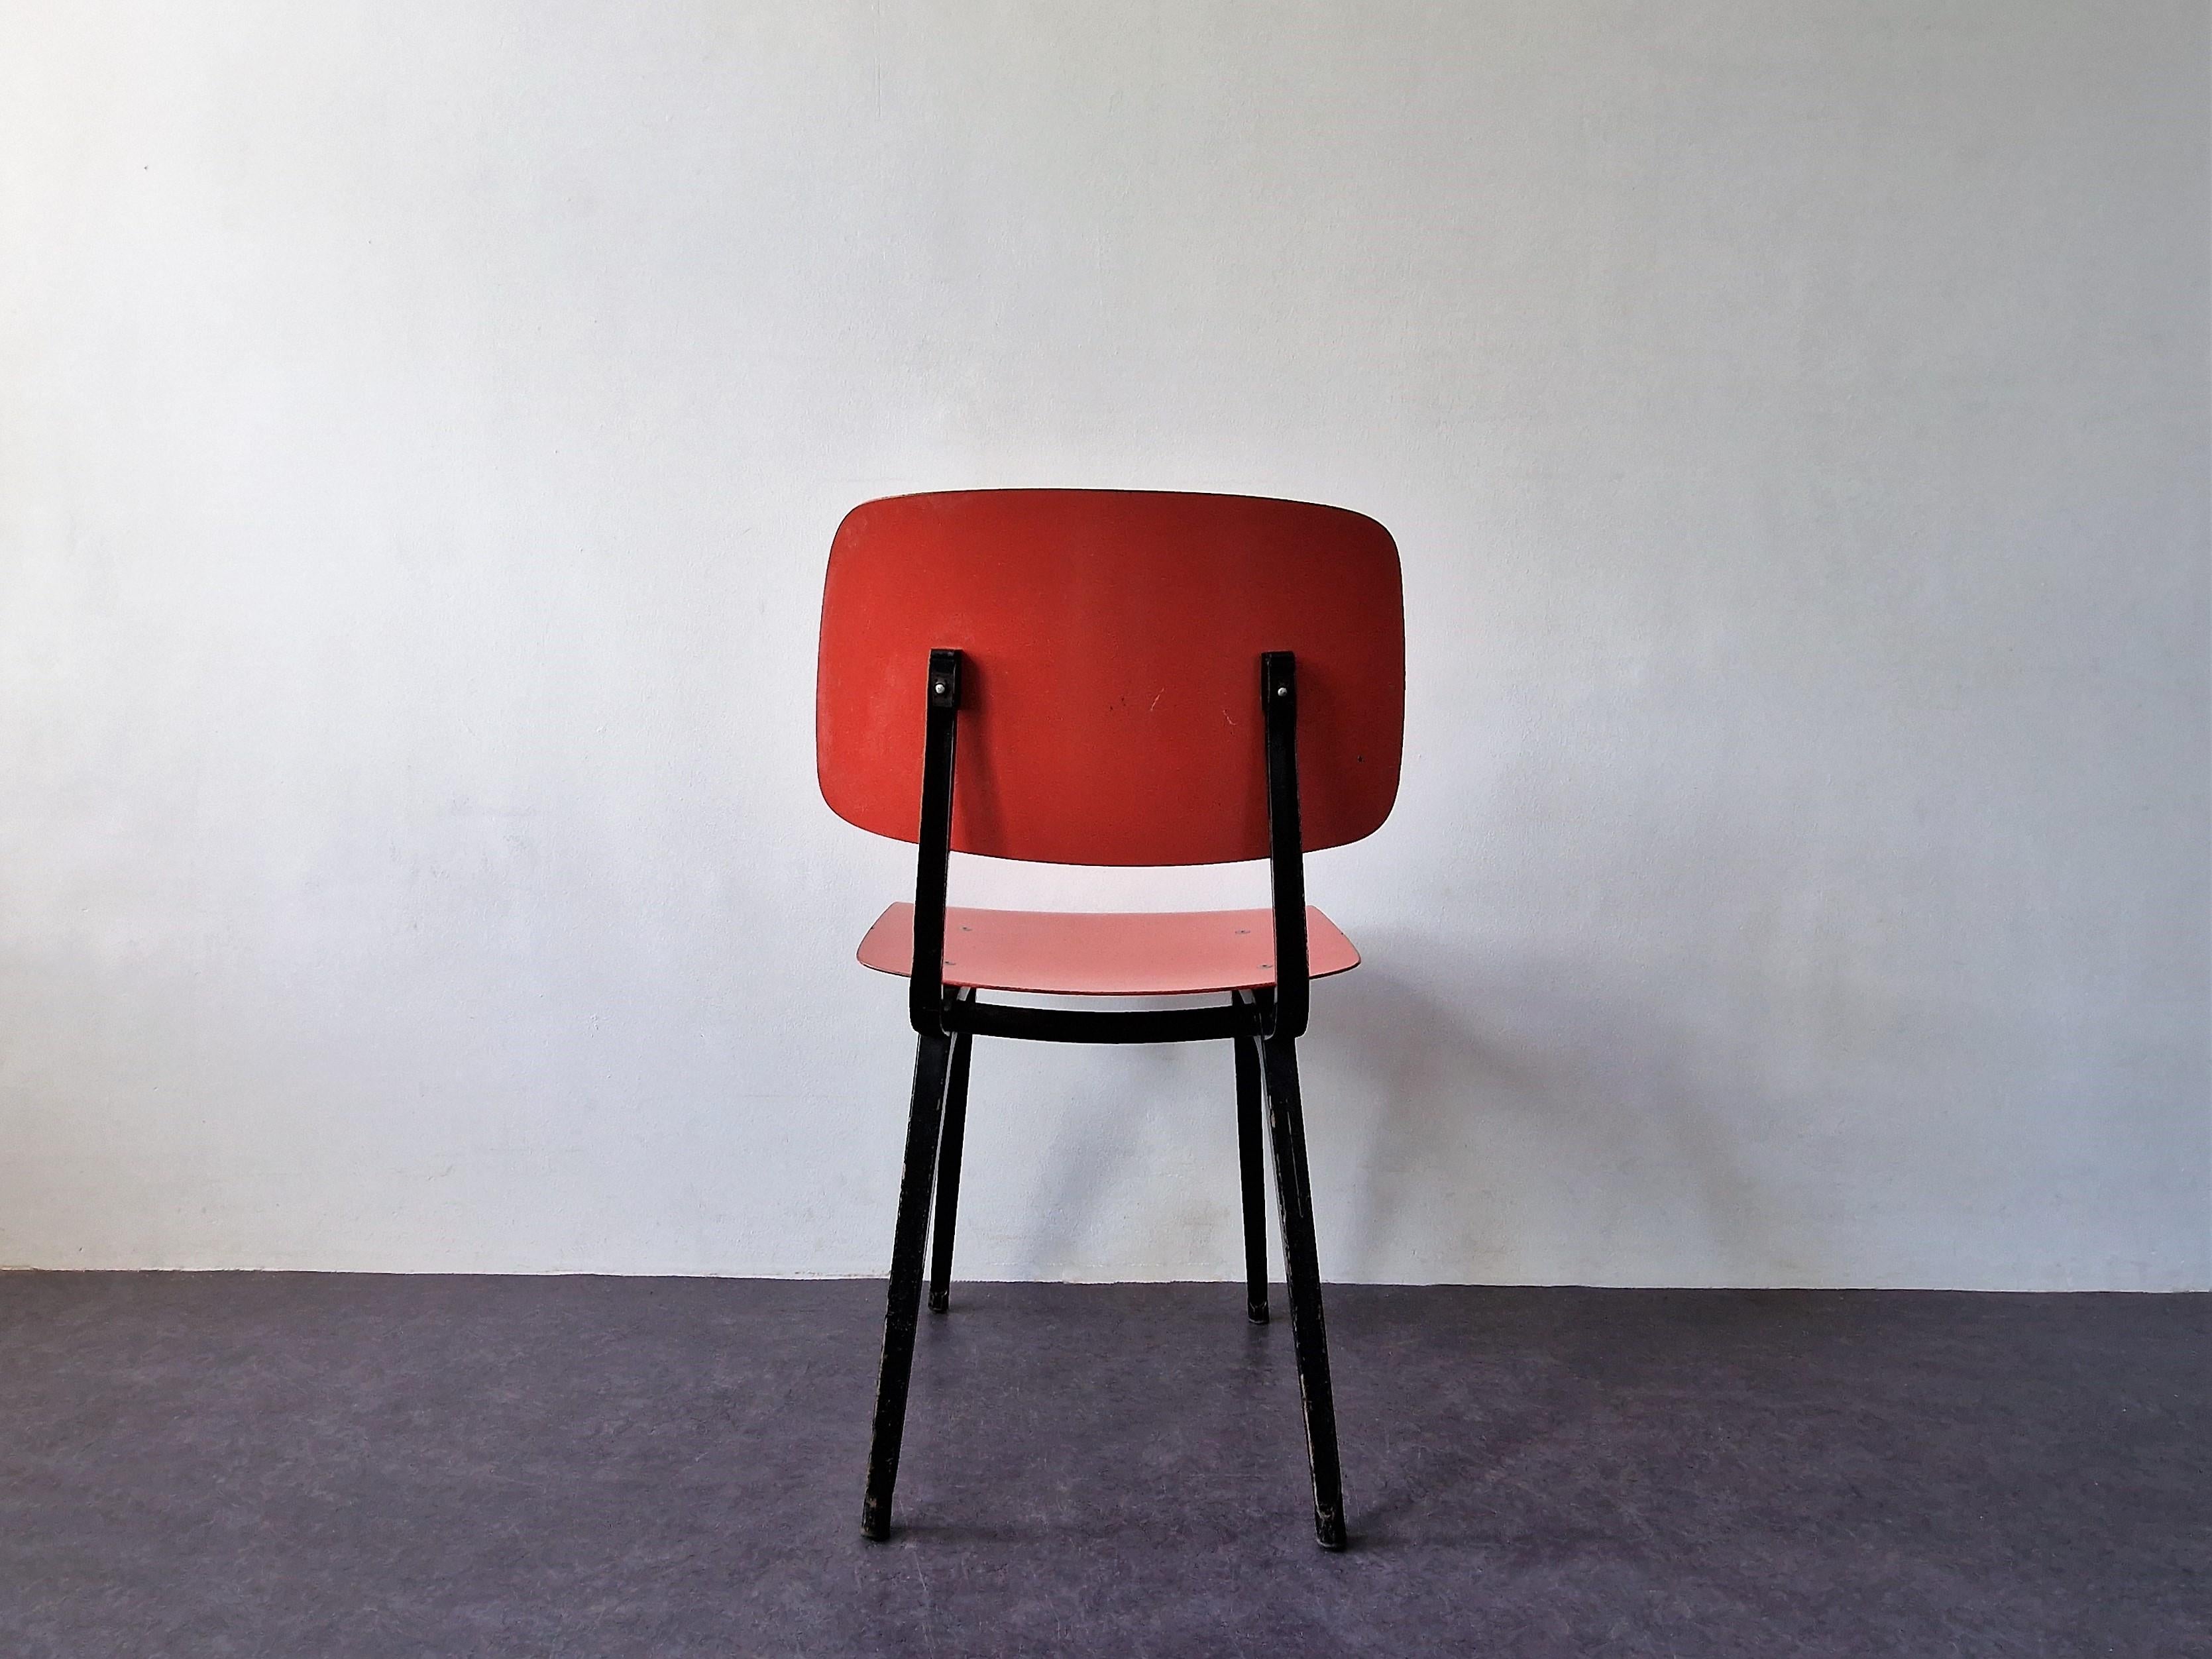 Set of 6 Revolt Chairs by Friso Kramer for Ahrend de Cirkel, Netherlands, 1956 In Good Condition For Sale In Steenwijk, NL